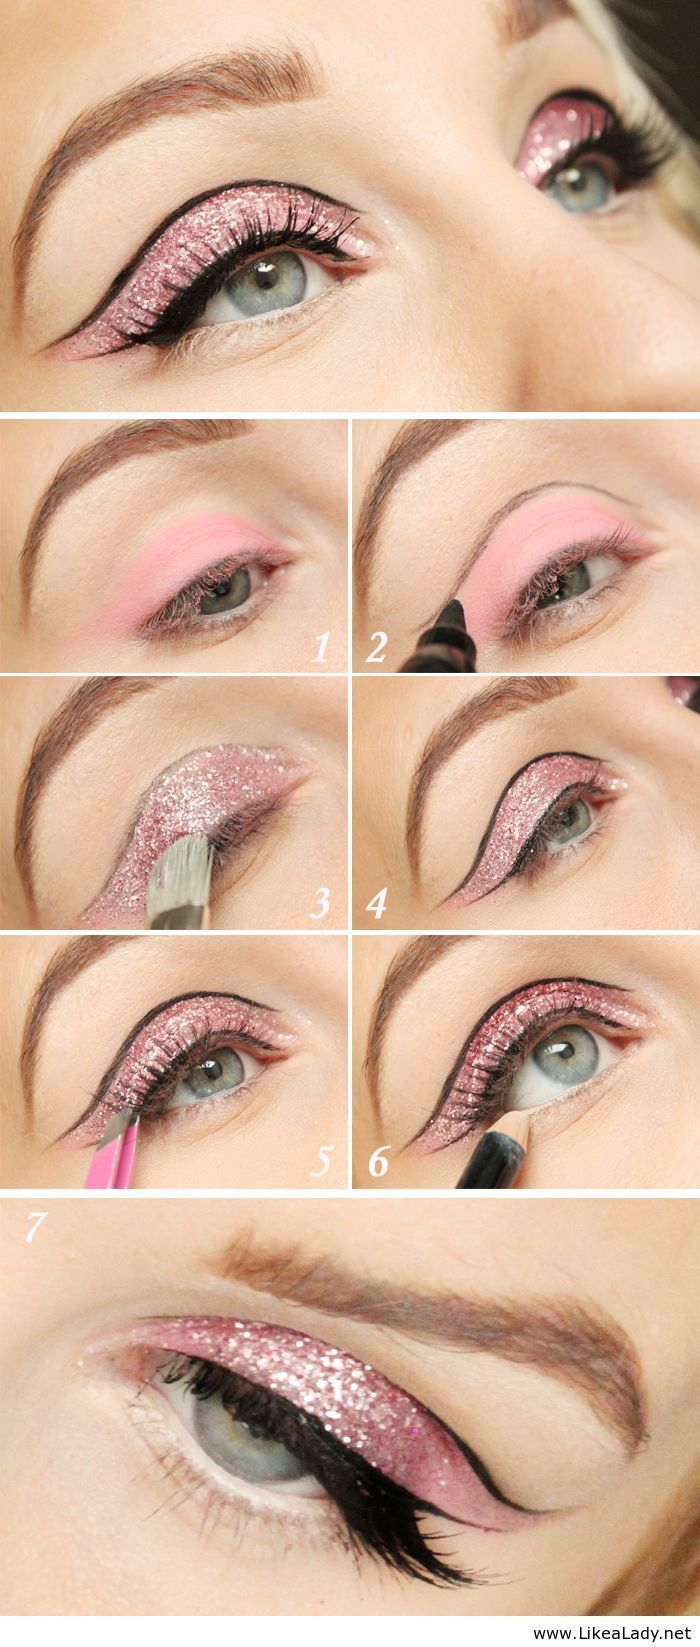 Gold And Black Eye Makeup Glitter Eye Makeup Tutorials Are Quite Easy To Achieve